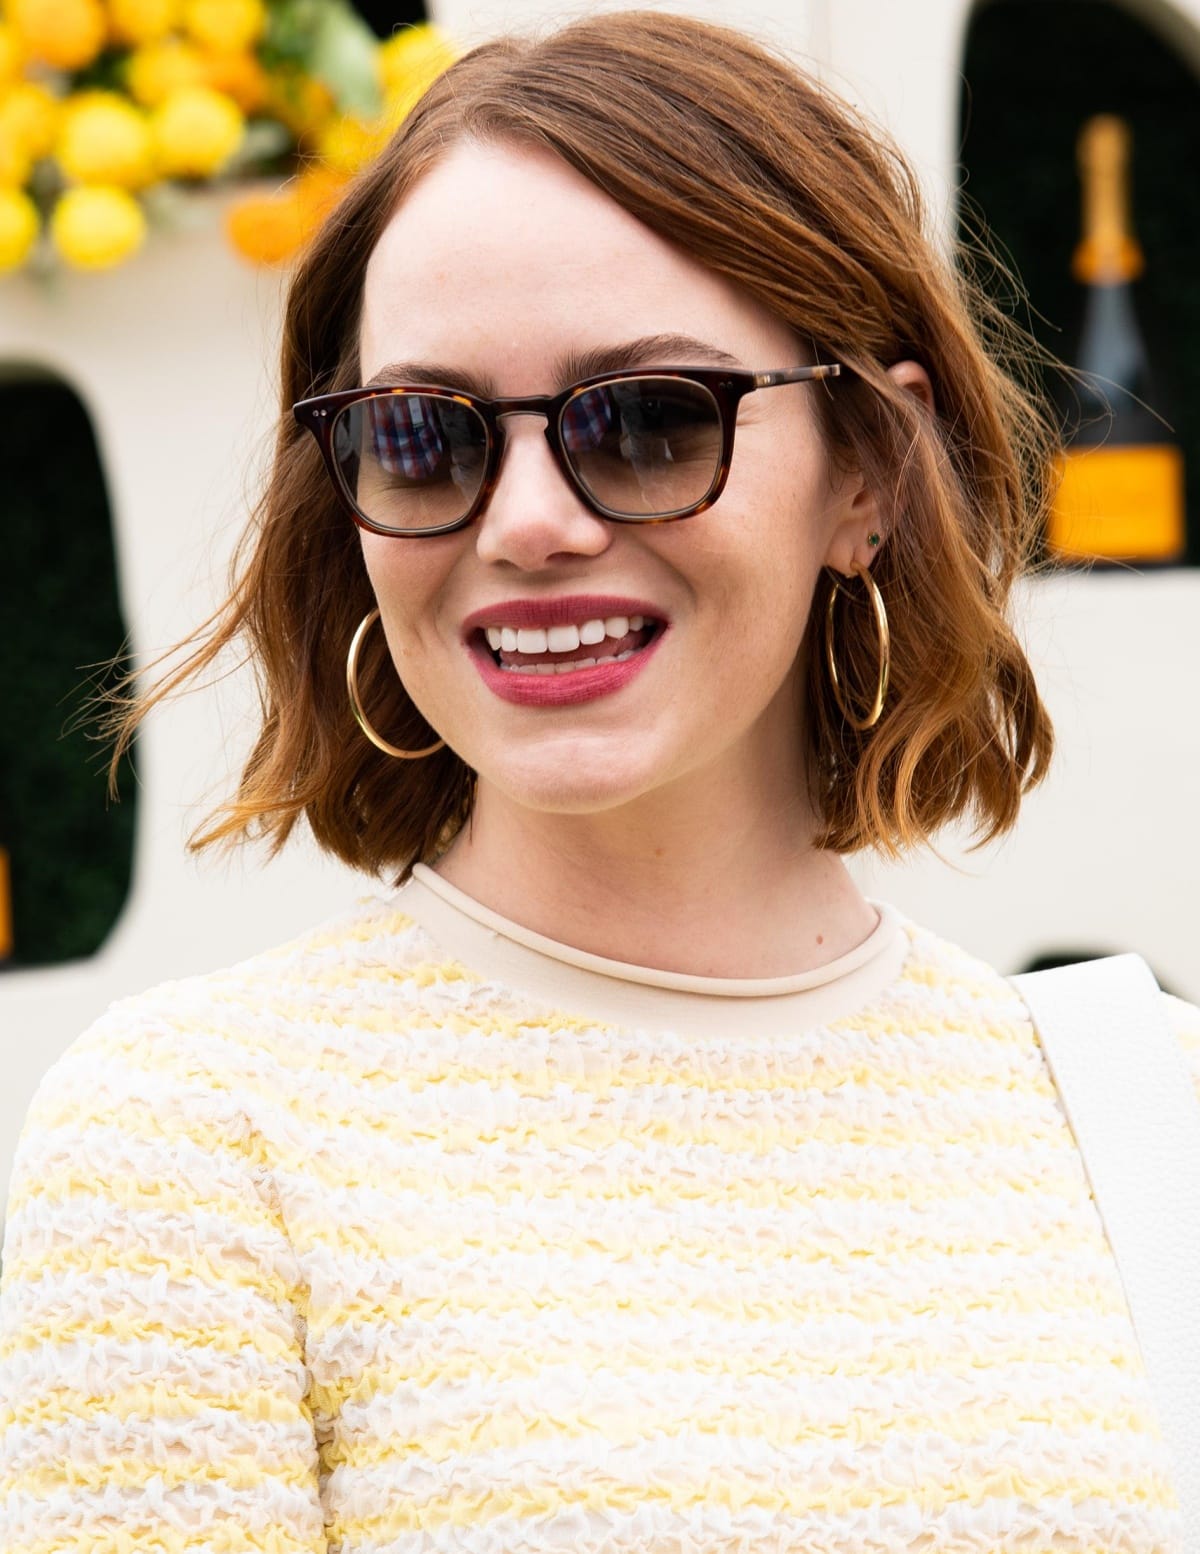 Emma Stone accessorized with Leight Getty tortoiseshell sunglasses and Melinda Maria Kendall 2 hoop earrings